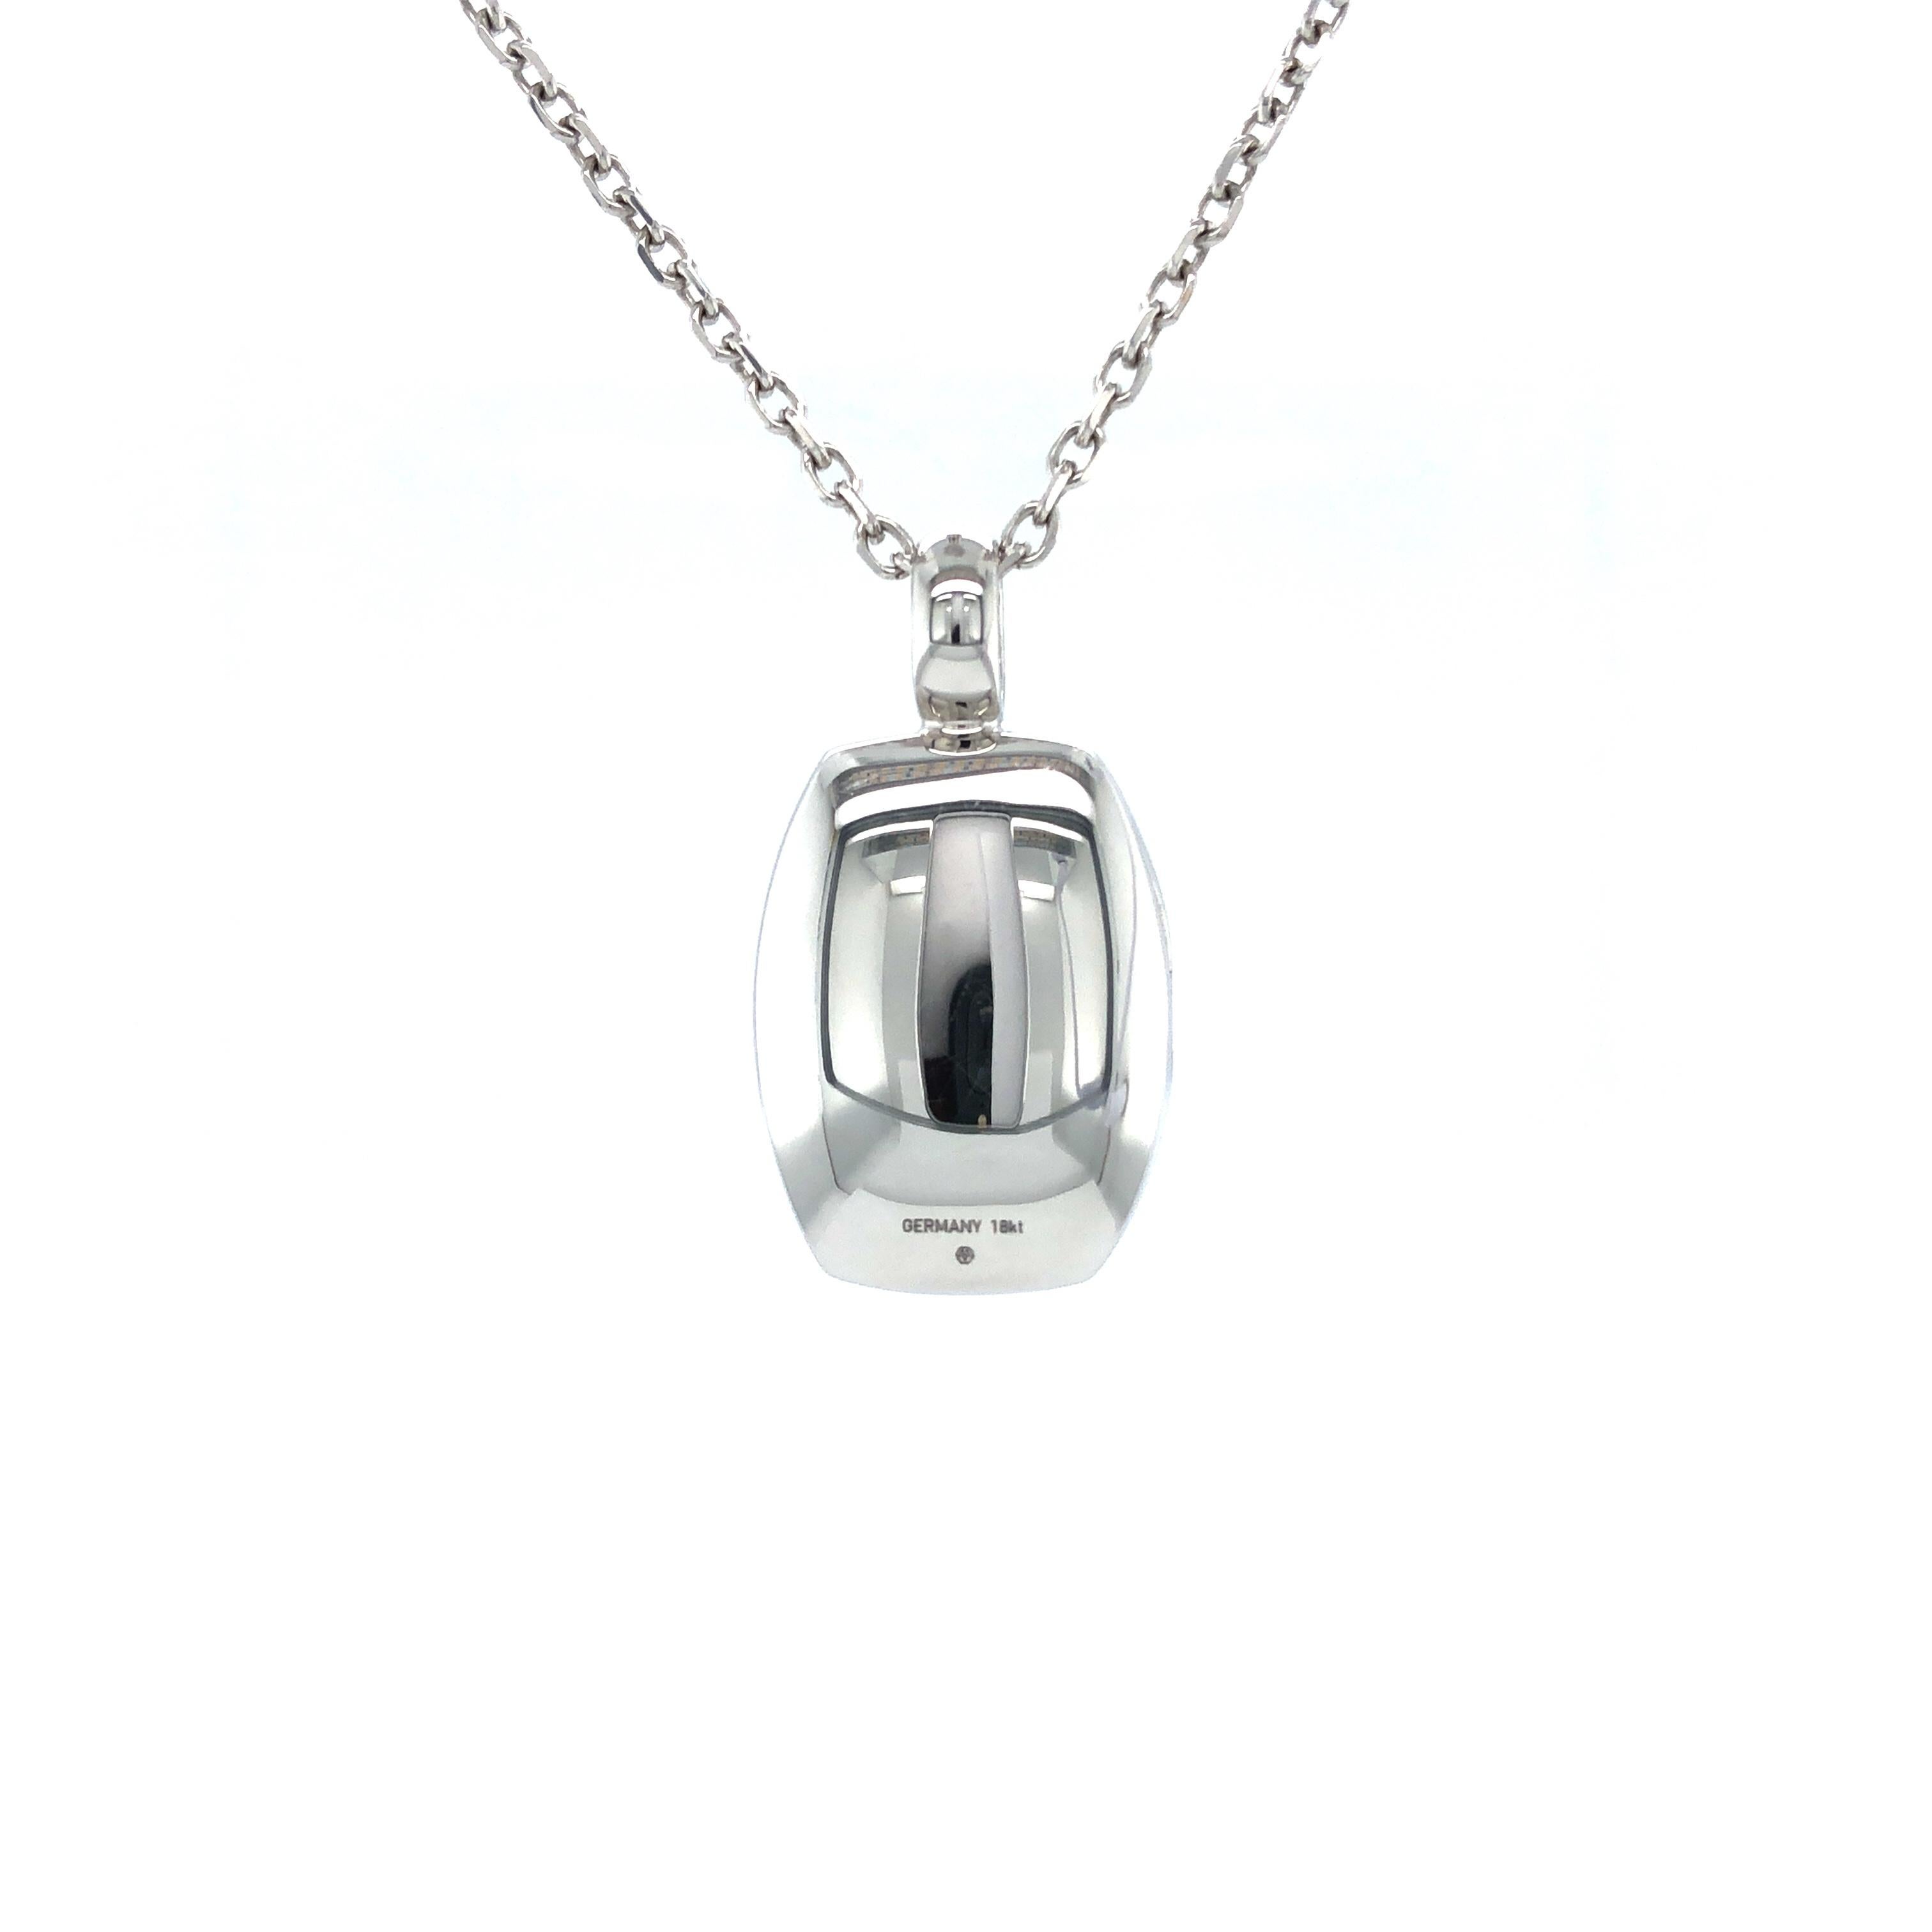 Contemporary Tonneau Shape - 18k White Gold - Pendant Locket Necklace with Rounded Corners For Sale